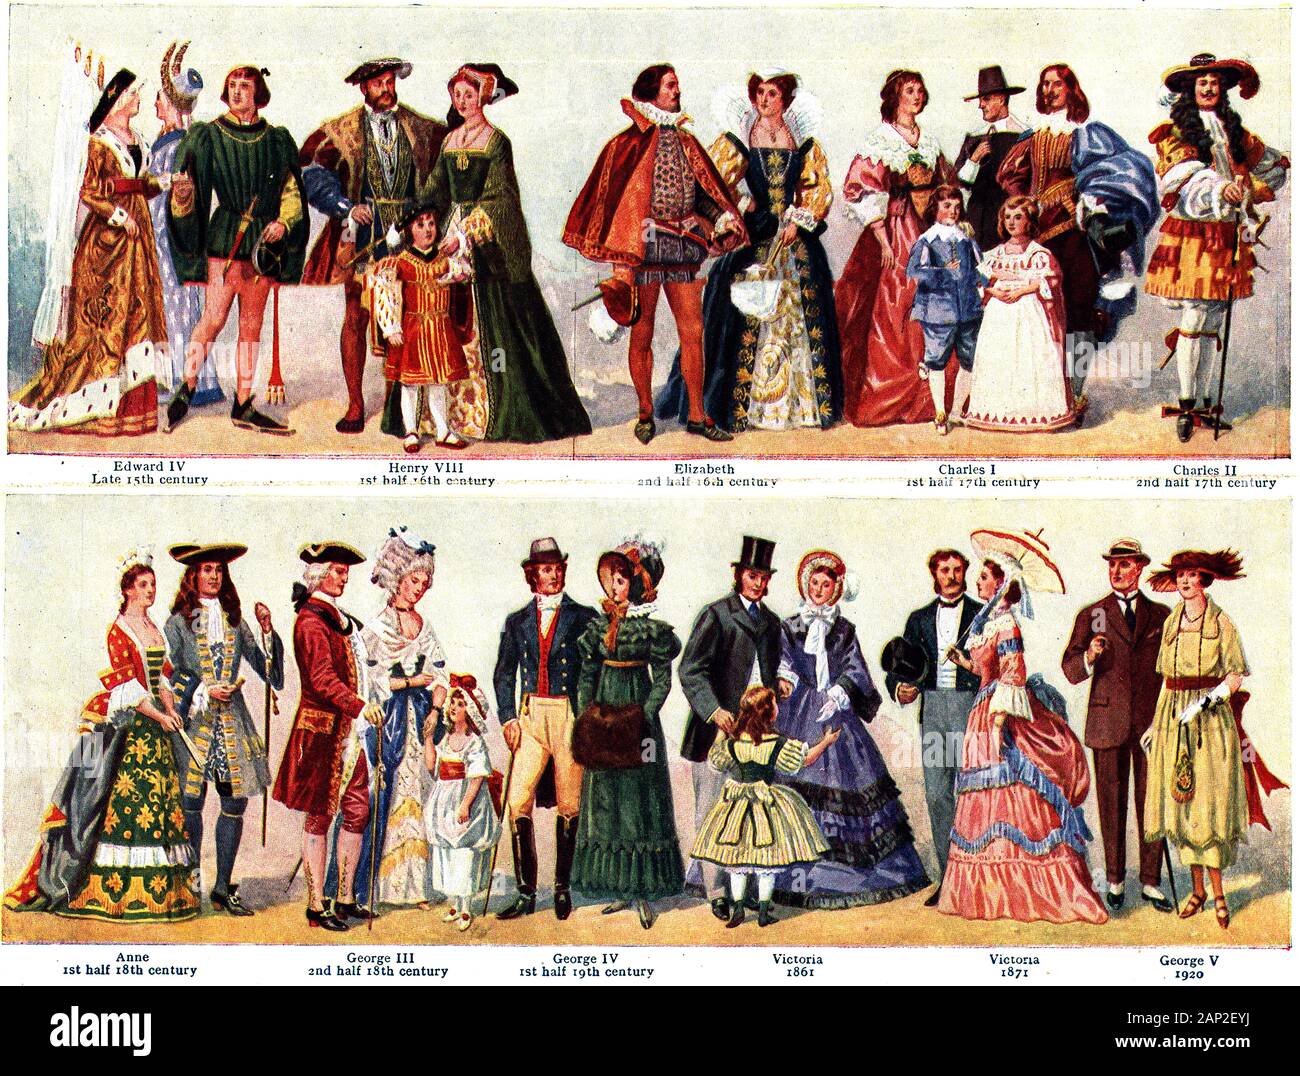 A  1921 coloured illustration showing typical costumes and styles of dress throughout the ages in Britain. Stock Photo